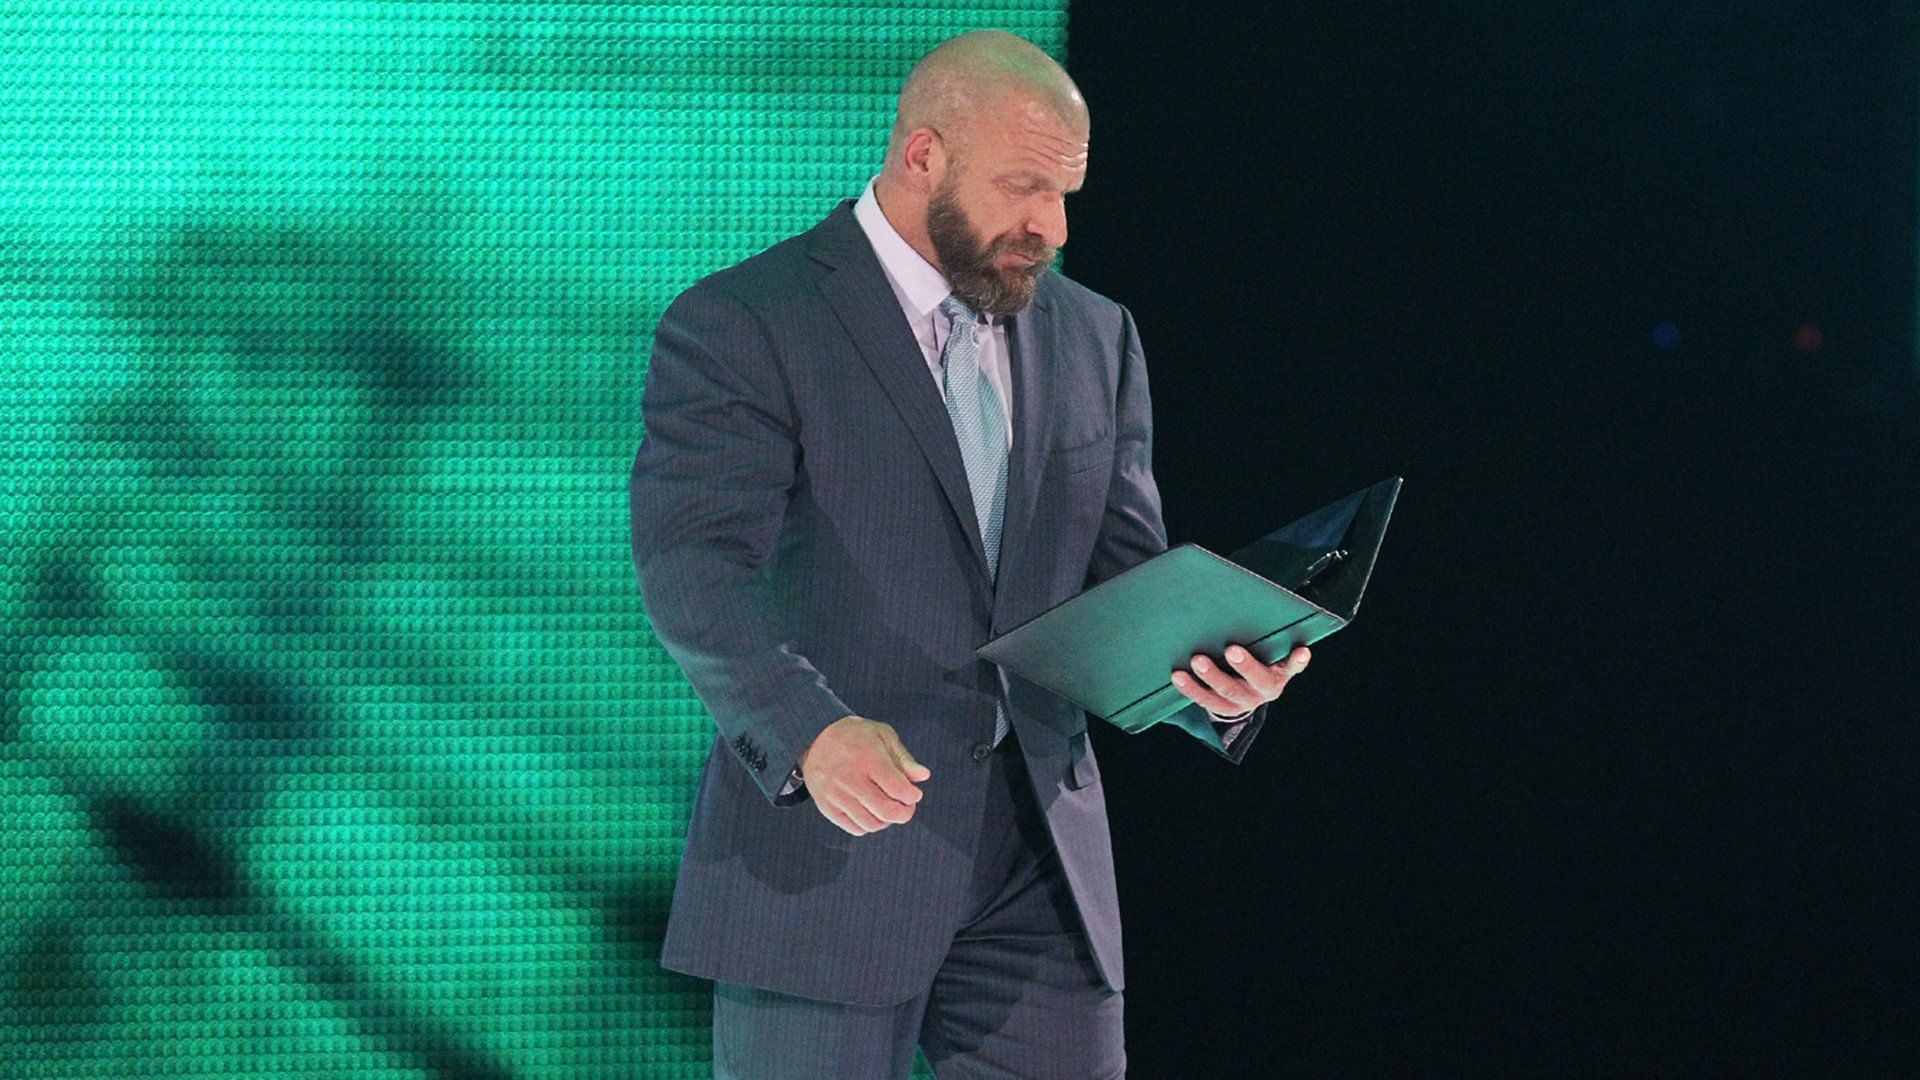 Triple H reviews a WWE contract on RAW